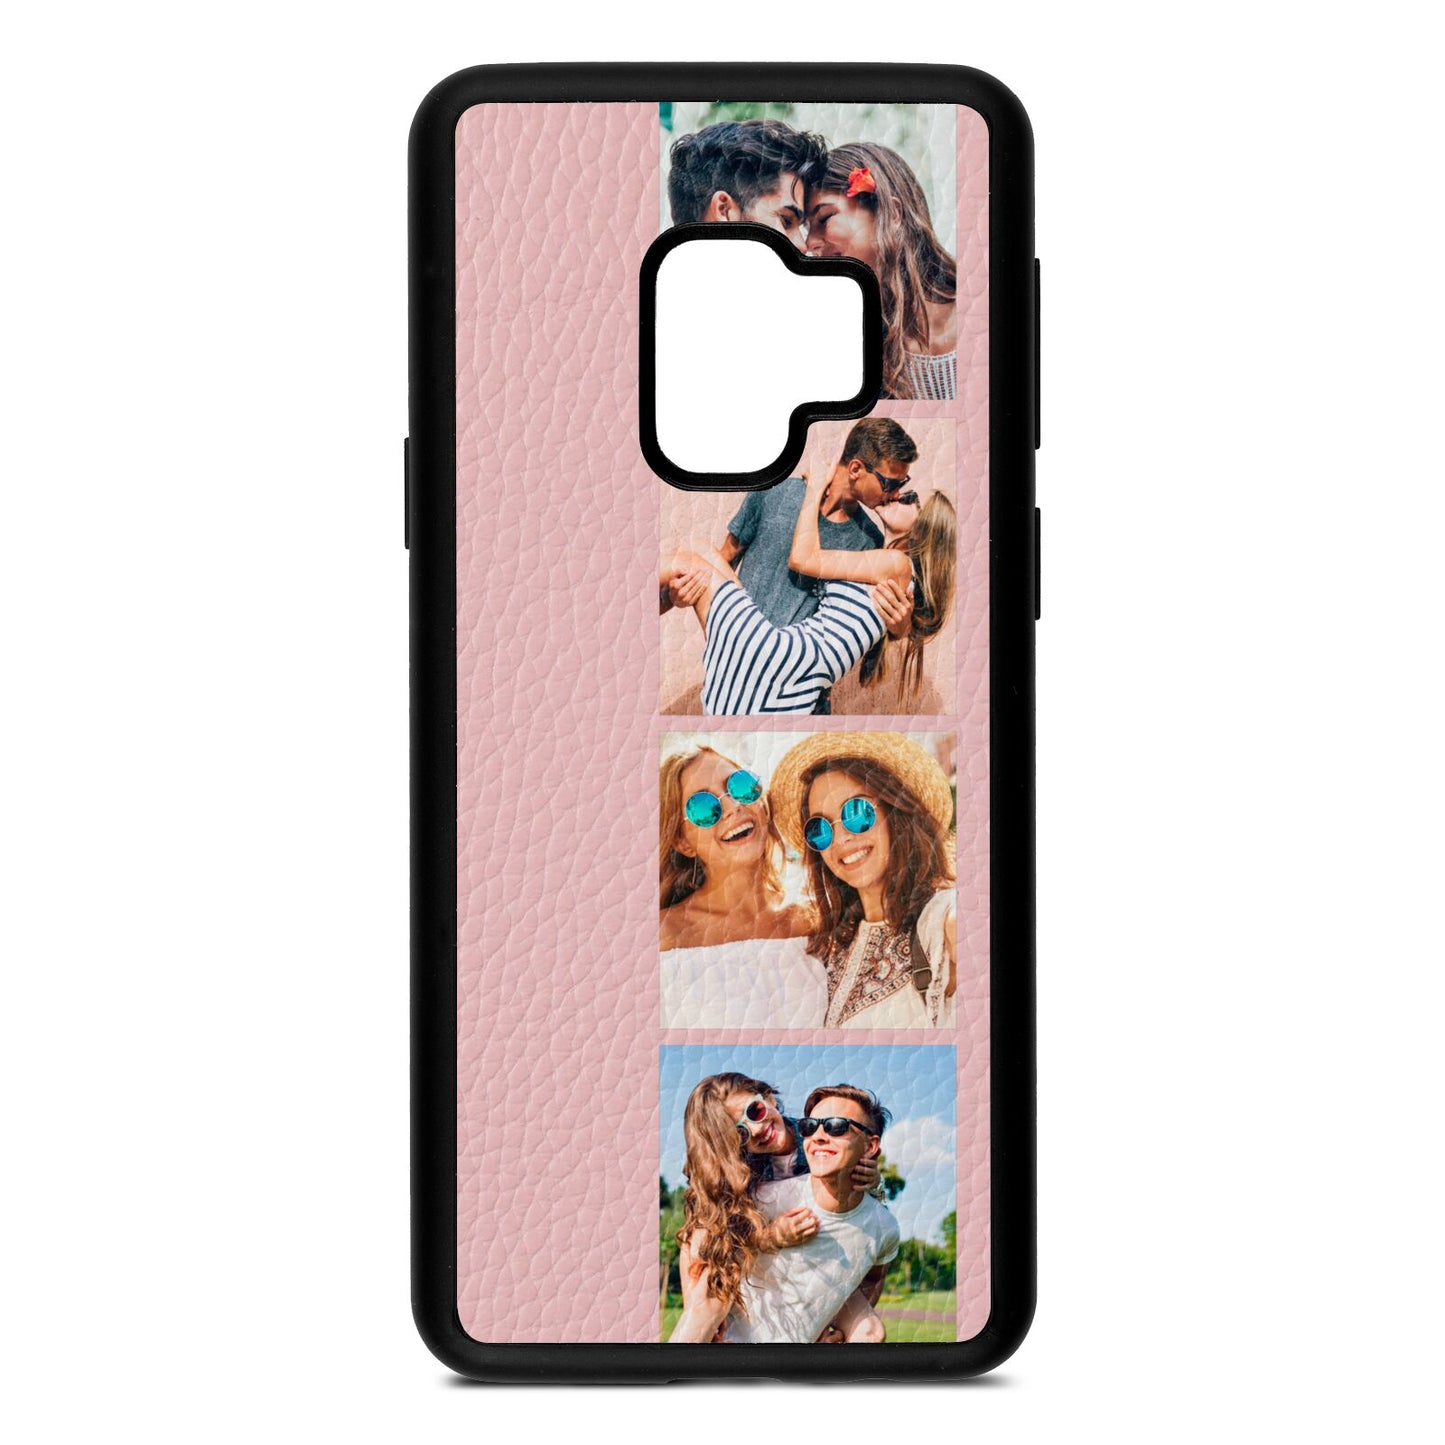 Photo Strip Montage Upload Pink Pebble Leather Samsung S9 Case